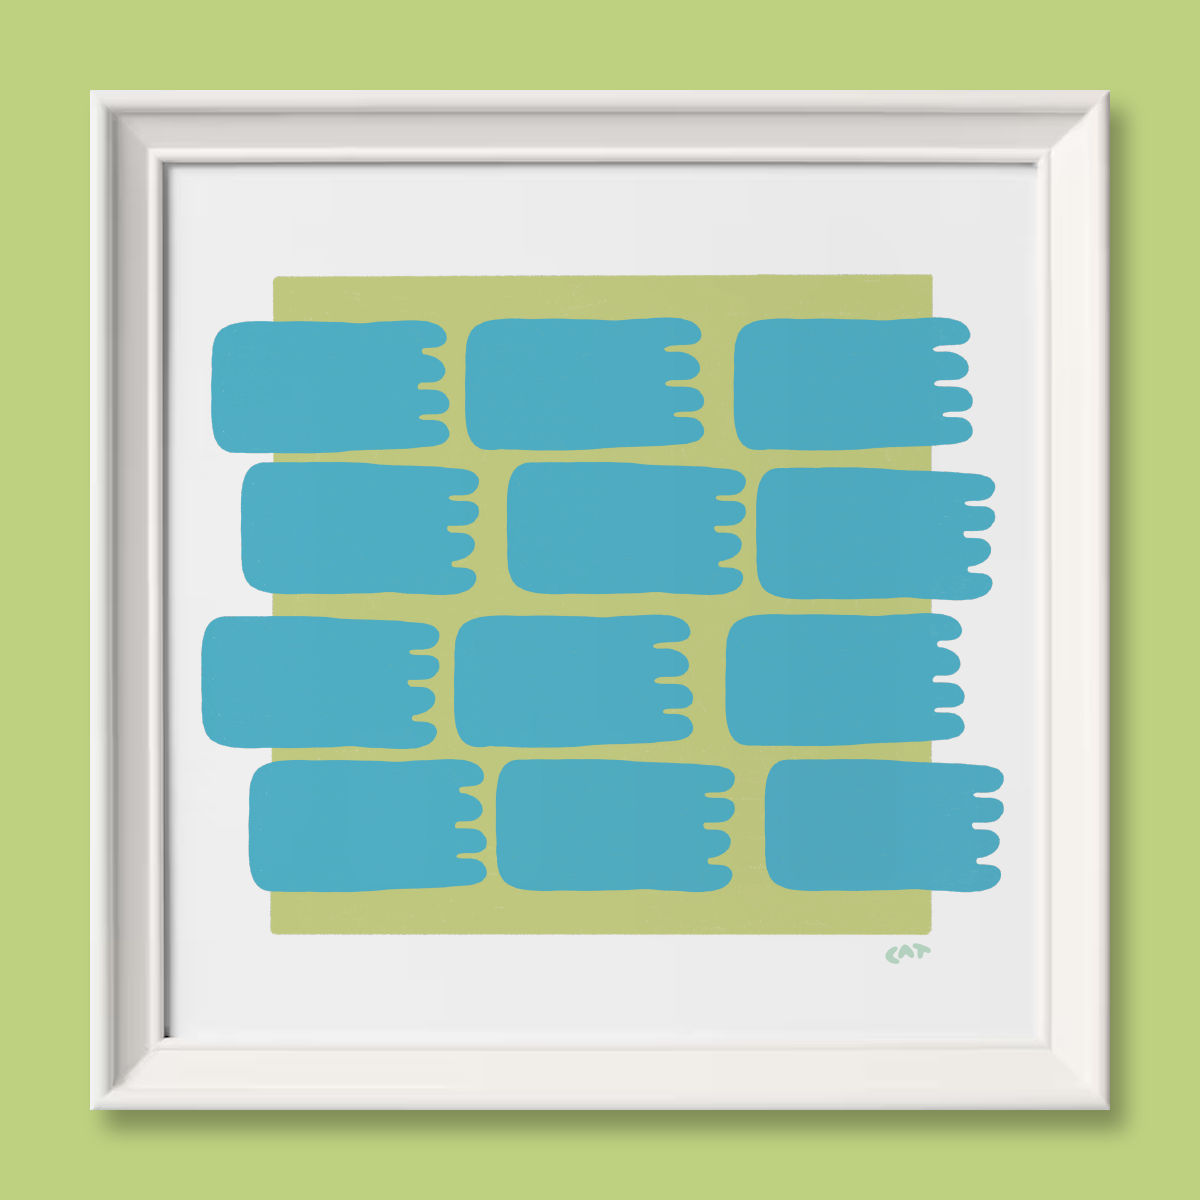 White framed print of a green square with blue squid like shapes floating on top.